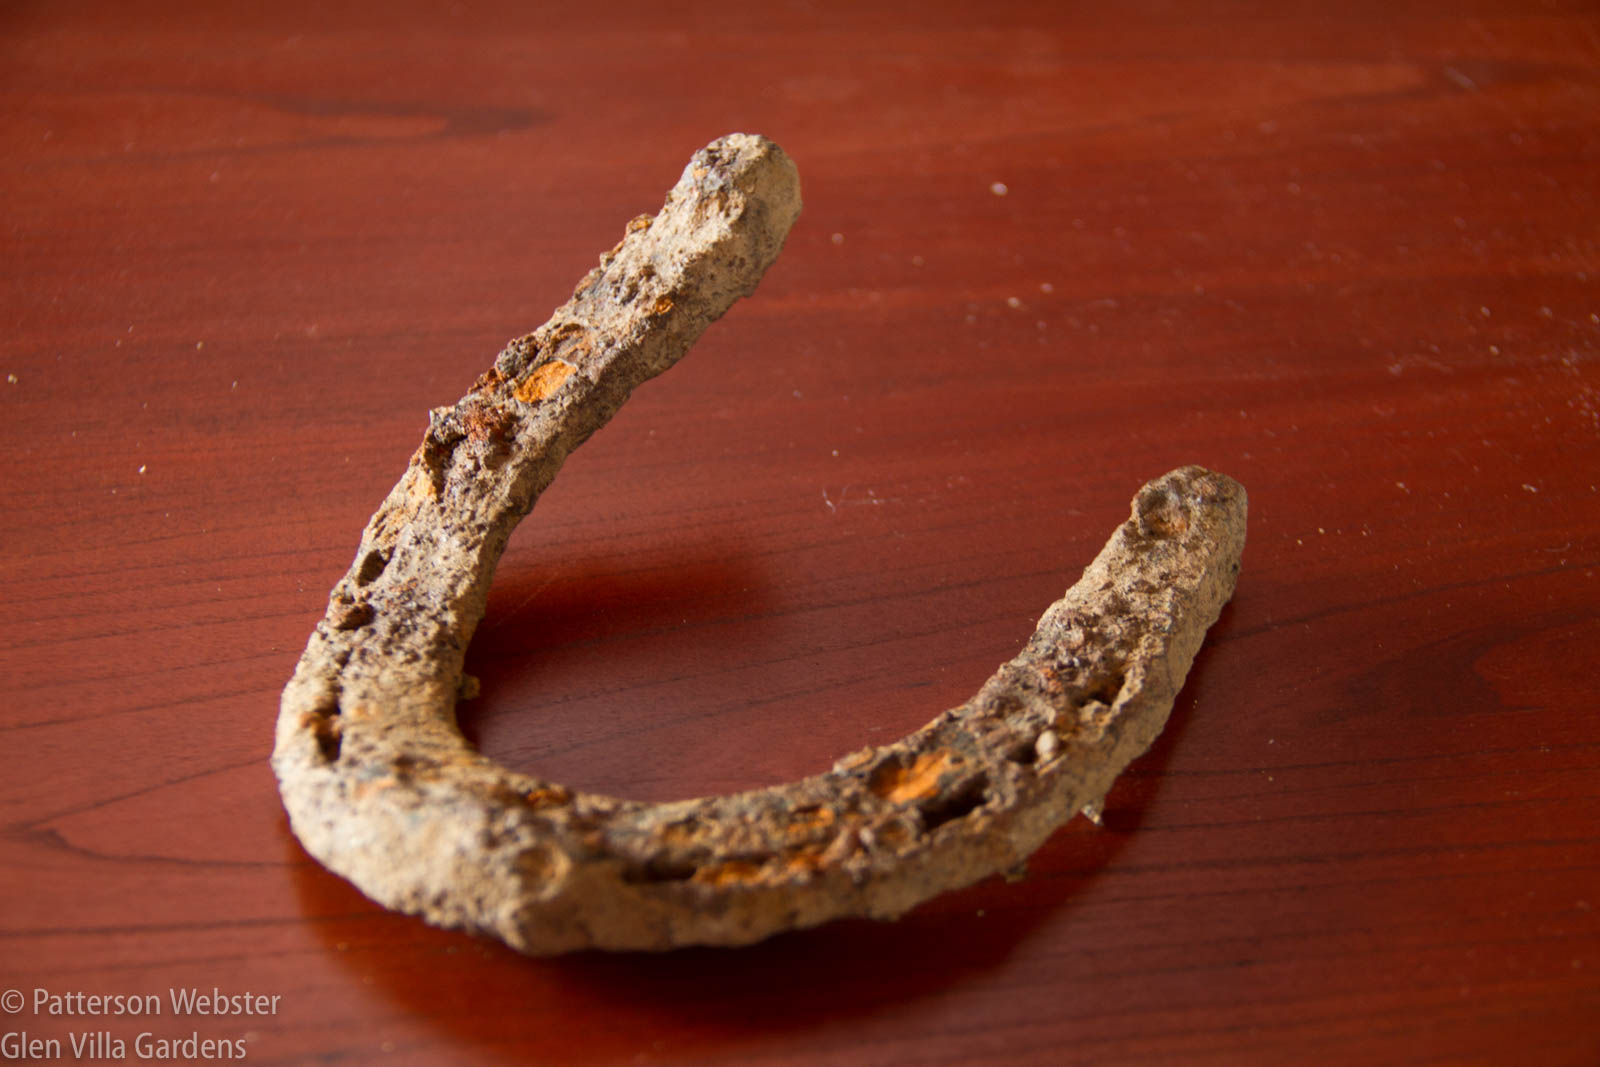 This lucky horseshoe was one of many bits and pieces we unearthed from the hotel wall. Maybe it will inspire an idea. i